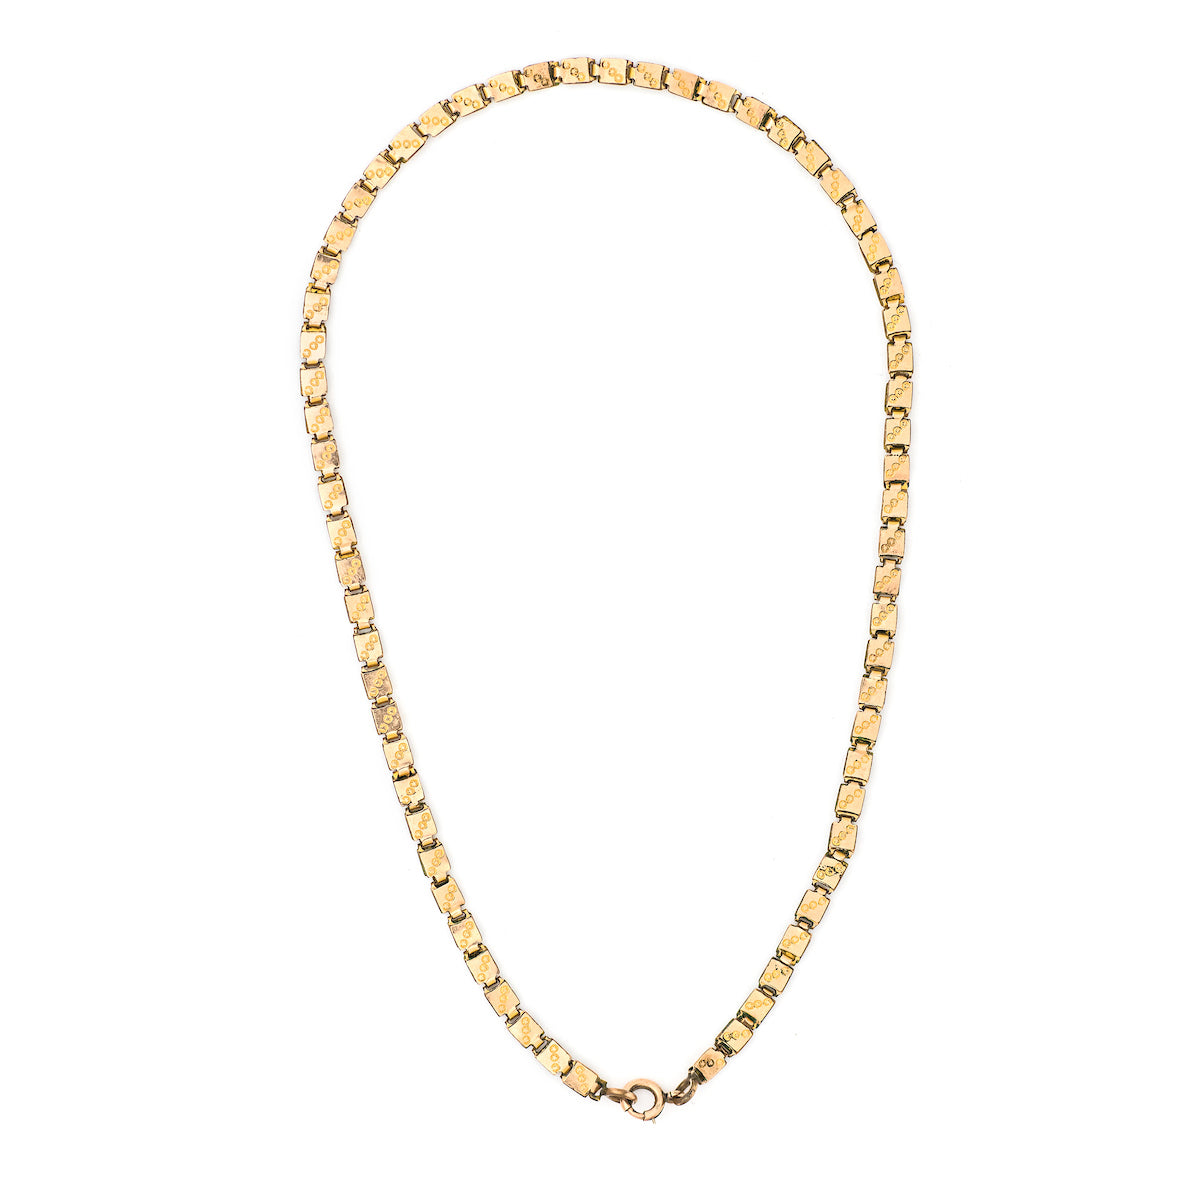 This 12K gold fill Victorian book chain features petite links with delicate etching on the front and back of each link. Measuring 15" long, wear this chain layered with other pieces or simply on its own. Full chain view